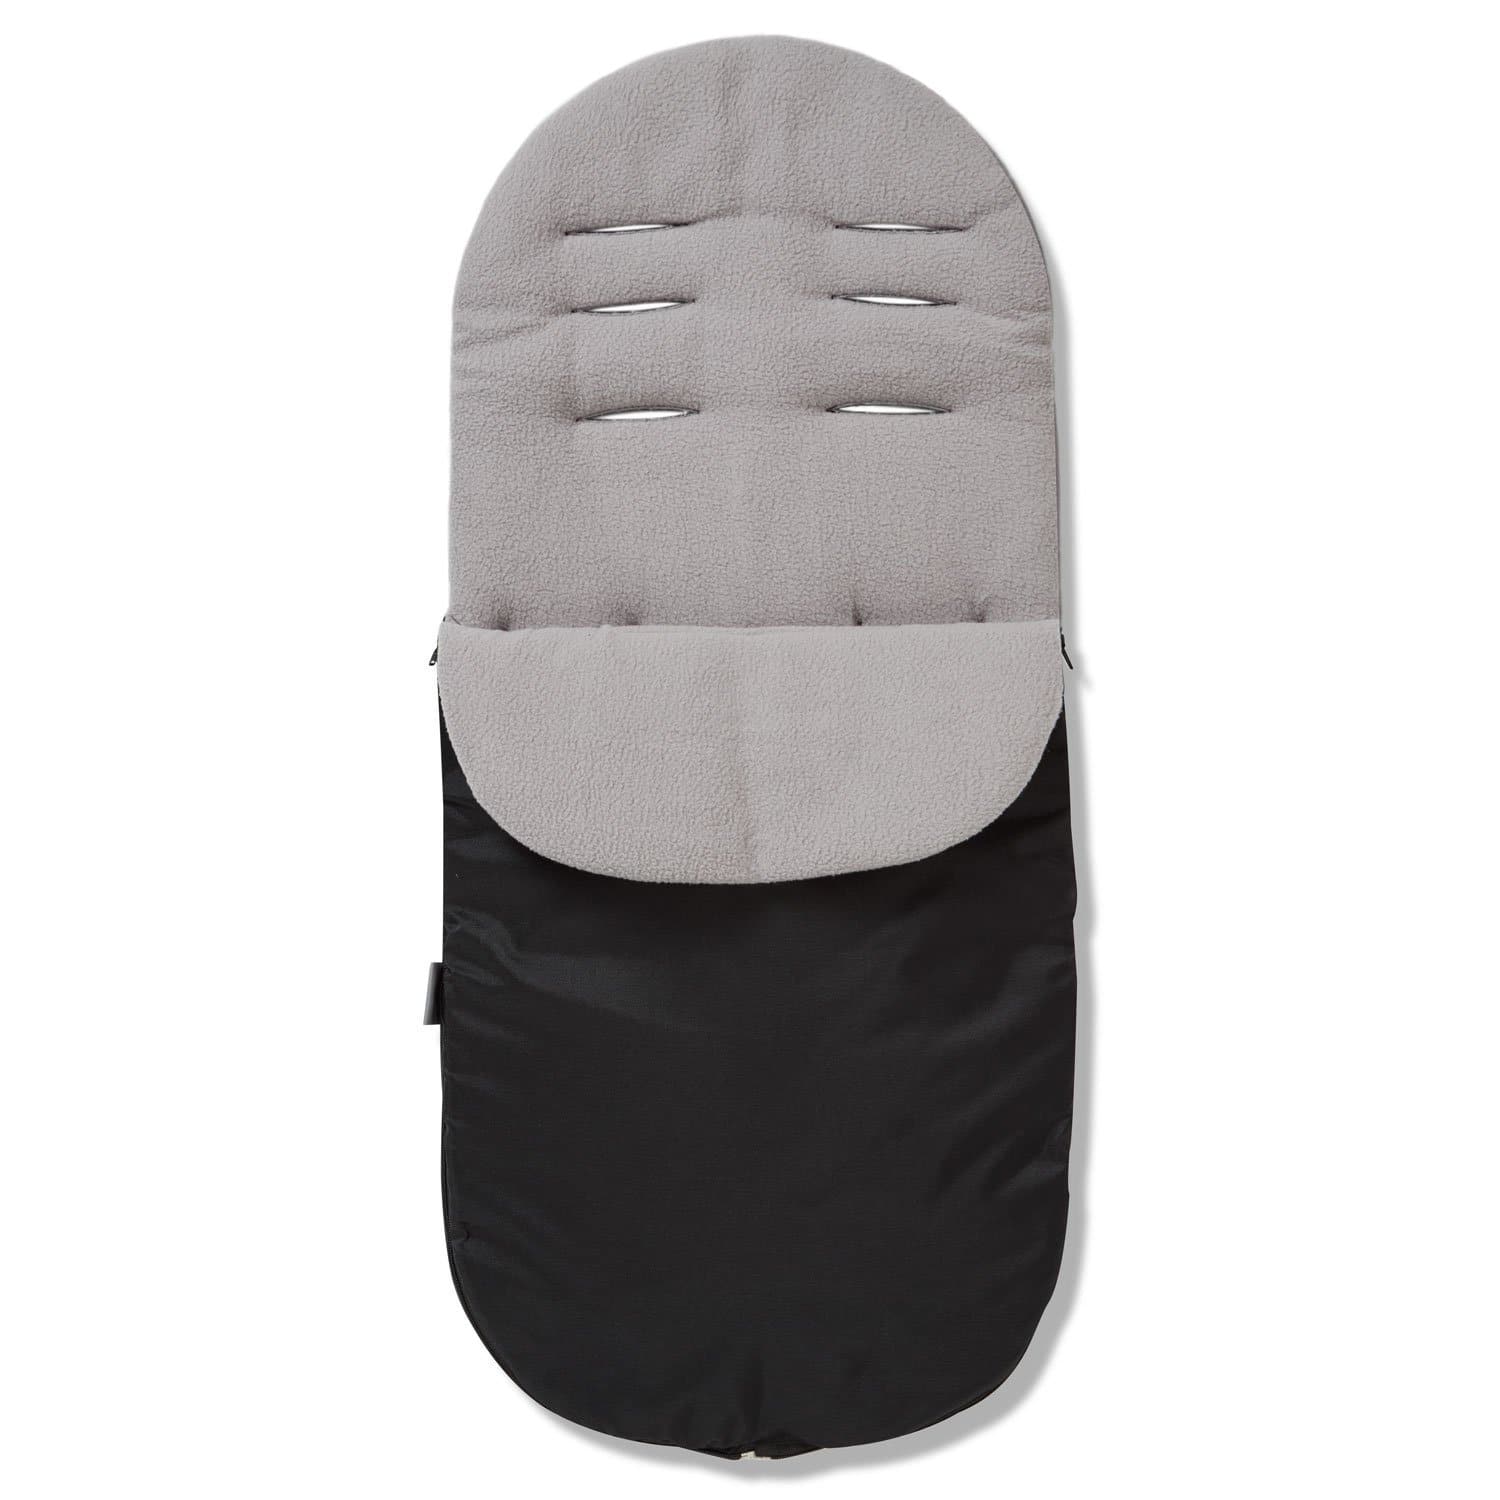 Footmuff / Cosy Toes Compatible with Hauck - For Your Little One